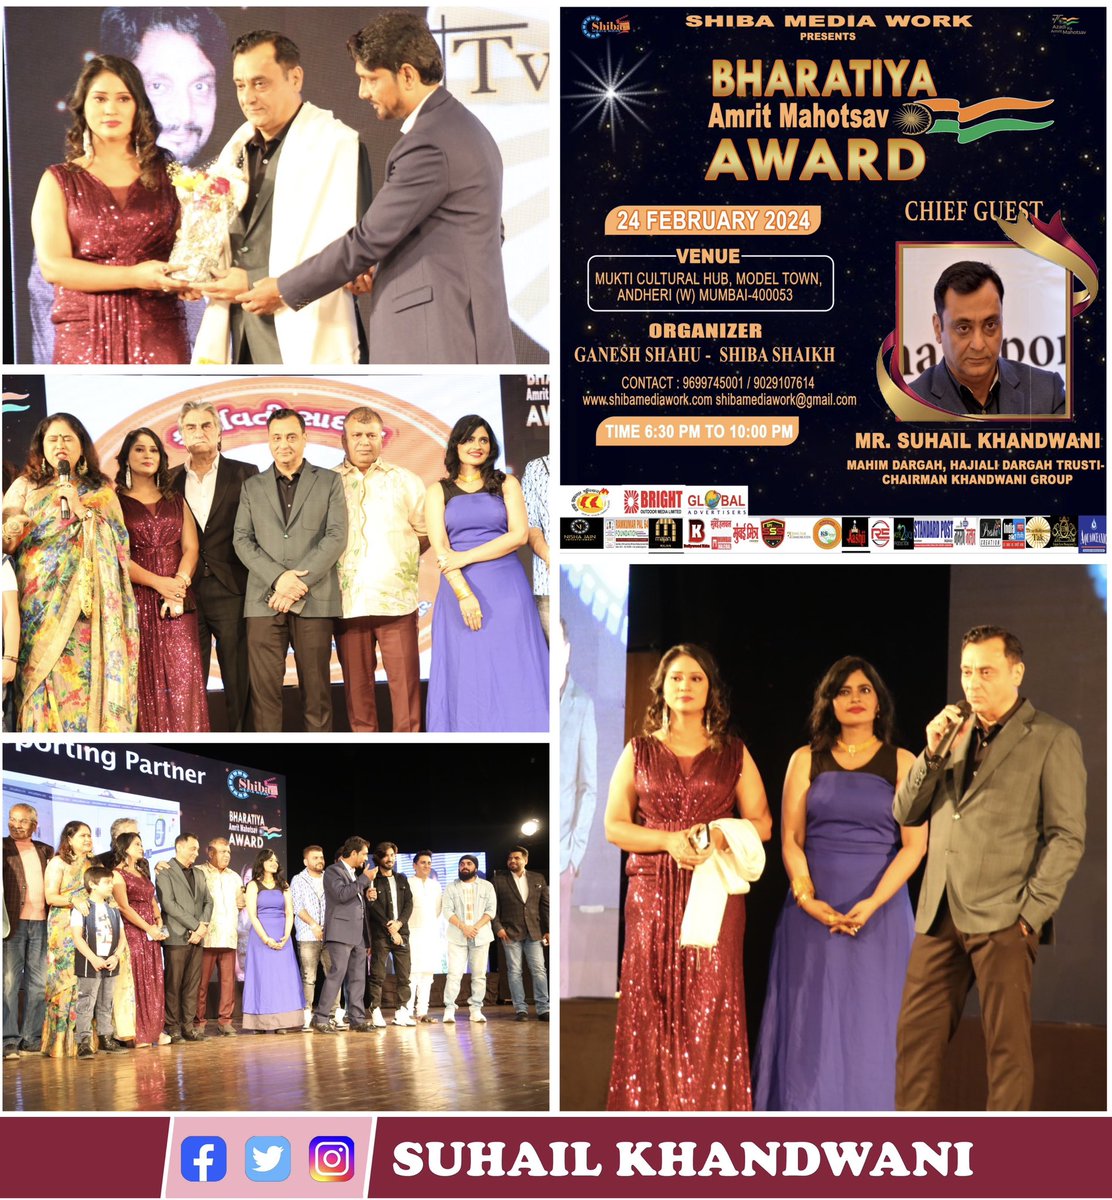 Graced the Bharatiya Amrit Mahotsav Award function as a Chief Guest at Multi Cultural Hub, Andheri West. The fabulous event was hosted by Shiba Shaikh and Ganesh Shahu and was attended by Mr. Ashish Shekar MLA BJP, Mr. Dilshad khan of Hulchal News, Mr. Ali khan from